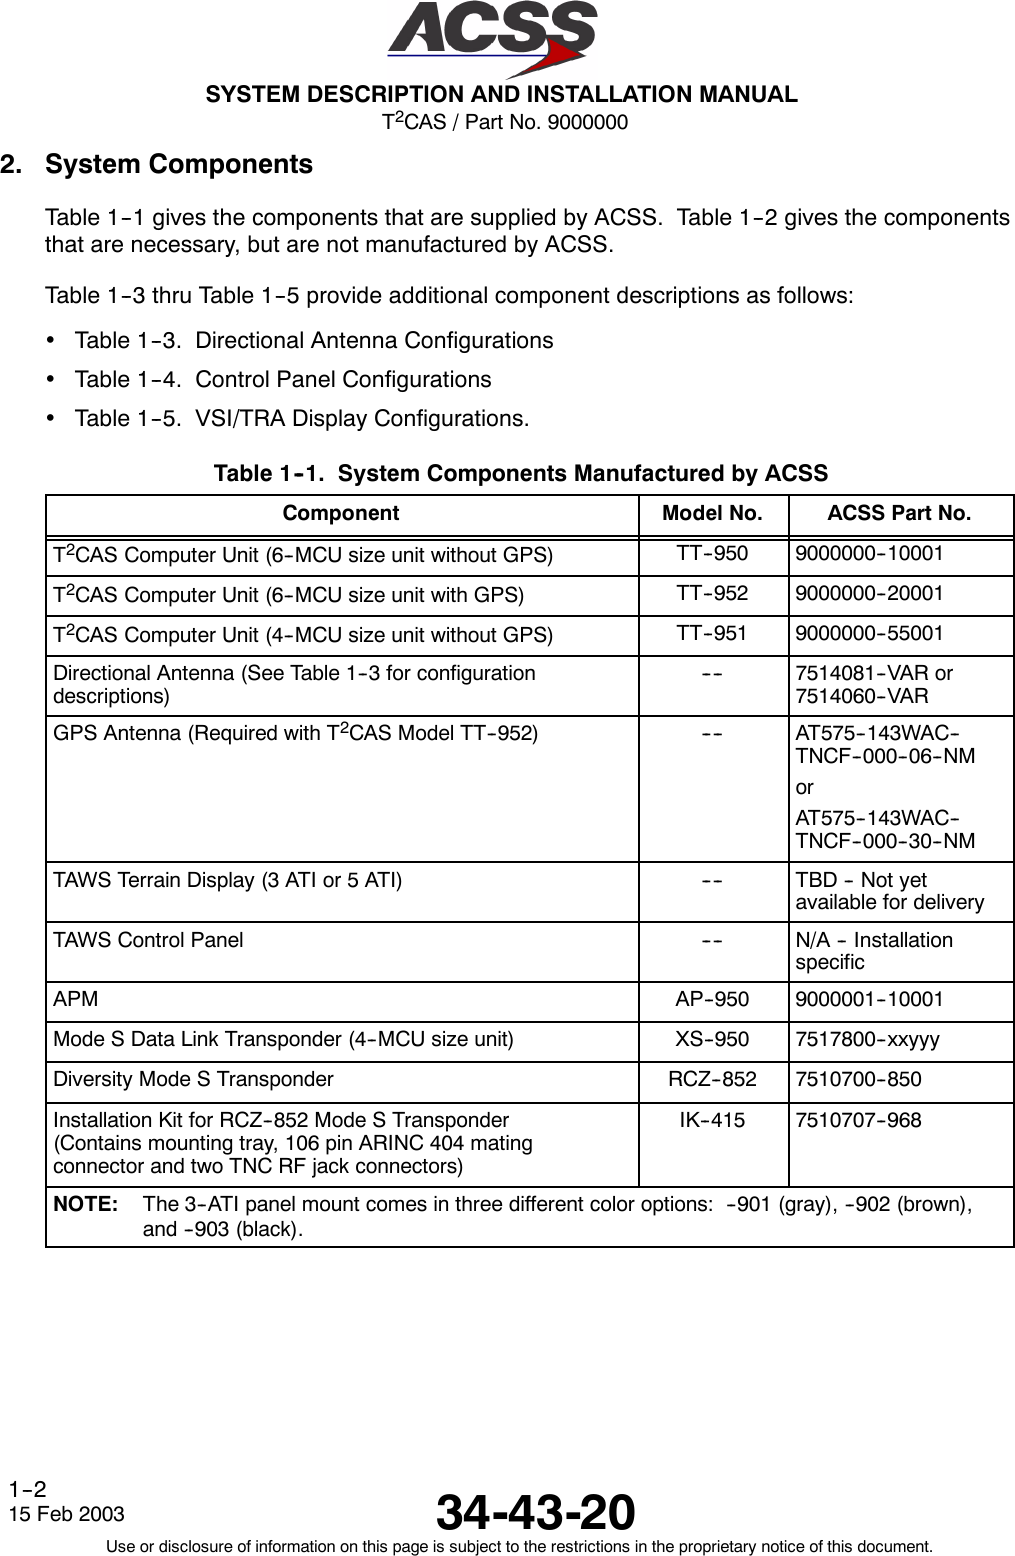 T2CAS / Part No. 9000000SYSTEM DESCRIPTION AND INSTALLATION MANUAL34-43-2015 Feb 2003Use or disclosure of information on this page is subject to the restrictions in the proprietary notice of this document.1--22. System ComponentsTable 1--1 gives the components that are supplied by ACSS. Table 1--2 gives the componentsthat are necessary, but are not manufactured by ACSS.Table 1--3 thru Table 1--5 provide additional component descriptions as follows:•Table 1--3. Directional Antenna Configurations•Table 1--4. Control Panel Configurations•Table 1--5. VSI/TRA Display Configurations.Table 1--1. System Components Manufactured by ACSSComponent Model No. ACSS Part No.T2CAS Computer Unit (6--MCU size unit without GPS) TT--950 9000000--10001T2CAS Computer Unit (6--MCU size unit with GPS) TT--952 9000000--20001T2CAS Computer Unit (4--MCU size unit without GPS) TT--951 9000000--55001Directional Antenna (See Table 1--3 for configurationdescriptions)-- -- 7514081--VAR or7514060--VARGPS Antenna (Required with T2CAS Model TT--952) -- -- AT575--143WAC--T N C F -- 0 0 0 -- 0 6 -- N MorAT575--143WAC--T N C F -- 0 0 0 -- 3 0 -- N MTAWS Terrain Display (3 ATI or 5 ATI) -- -- TBD -- Not yetavailable for deliveryTAWS Control Panel -- -- N/A -- InstallationspecificAPM AP--950 9000001--10001Mode S Data Link Transponder (4--MCU size unit) XS--950 7517800--xxyyyDiversity Mode S Transponder RCZ--852 7510700--850Installation Kit for RCZ--852 Mode S Transponder(Contains mounting tray, 106 pin ARINC 404 matingconnector and two TNC RF jack connectors)IK--415 7510707--968NOTE: The 3--ATI panel mount comes in three different color options: --901 (gray), --902 (brown),and --903 (black).